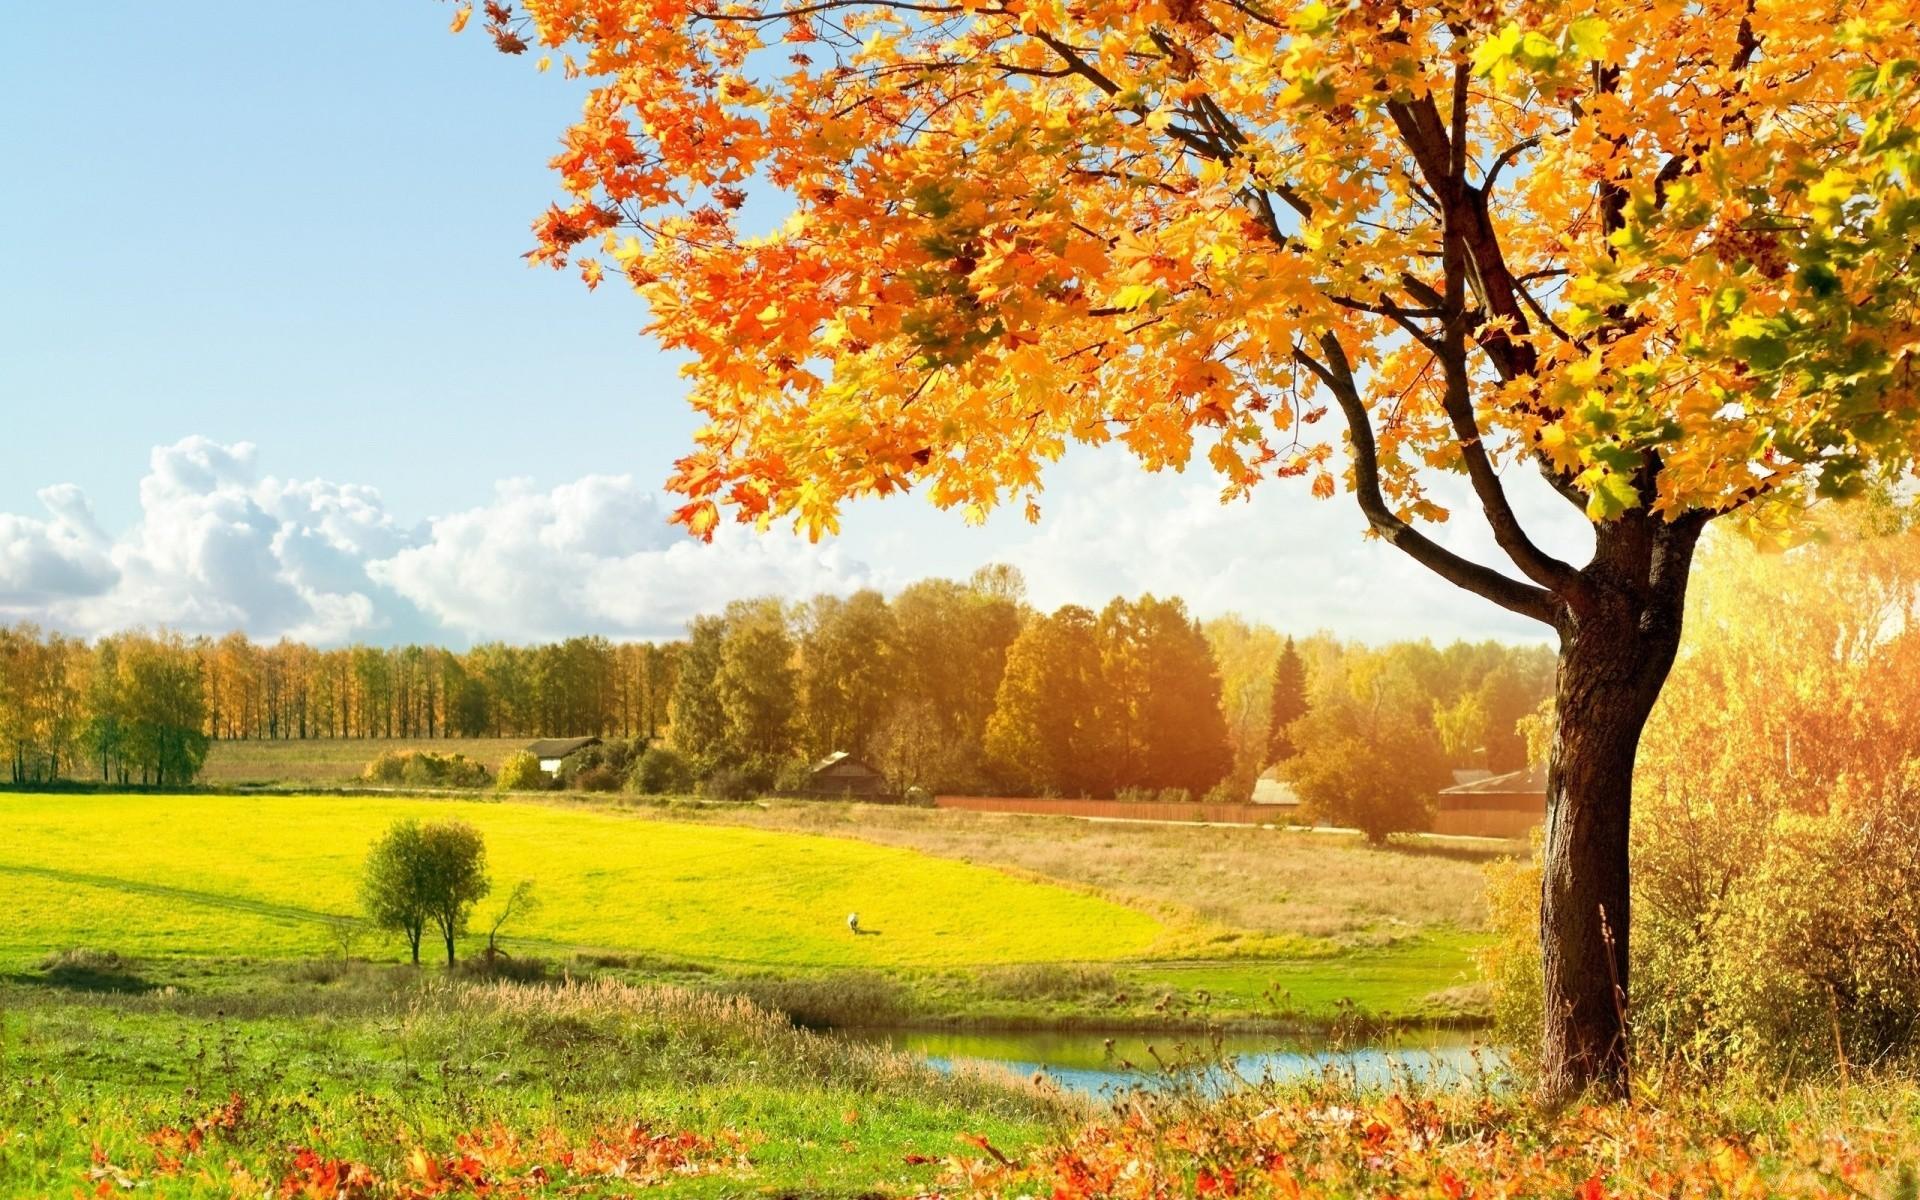 A Beautiful View Of Colorful Autumn Trees